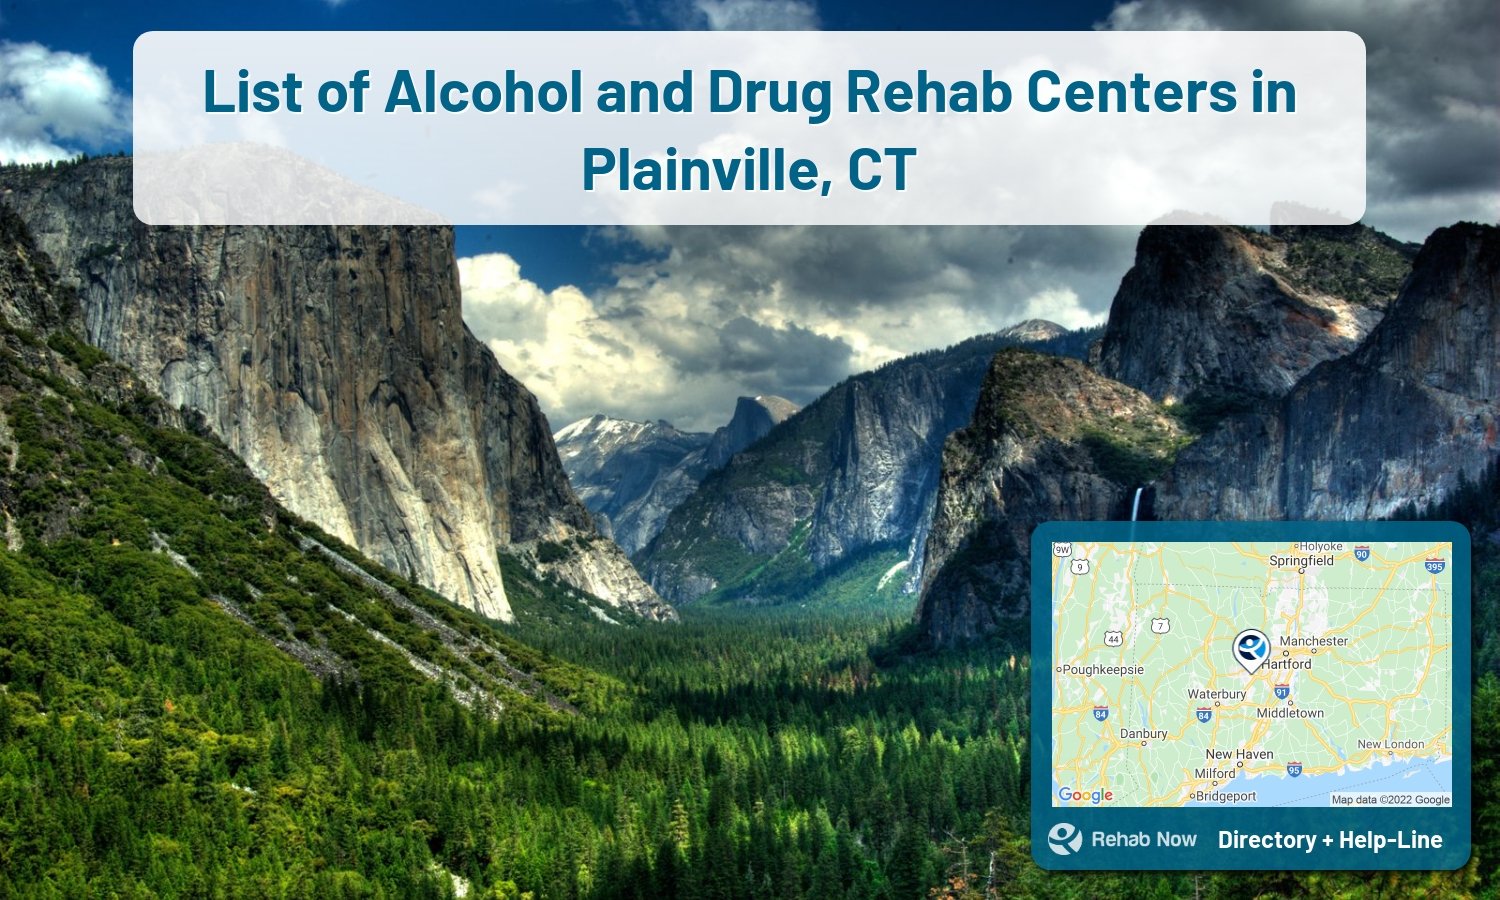 Plainville, CT Treatment Centers. Find drug rehab in Plainville, Connecticut, or detox and treatment programs. Get the right help now!